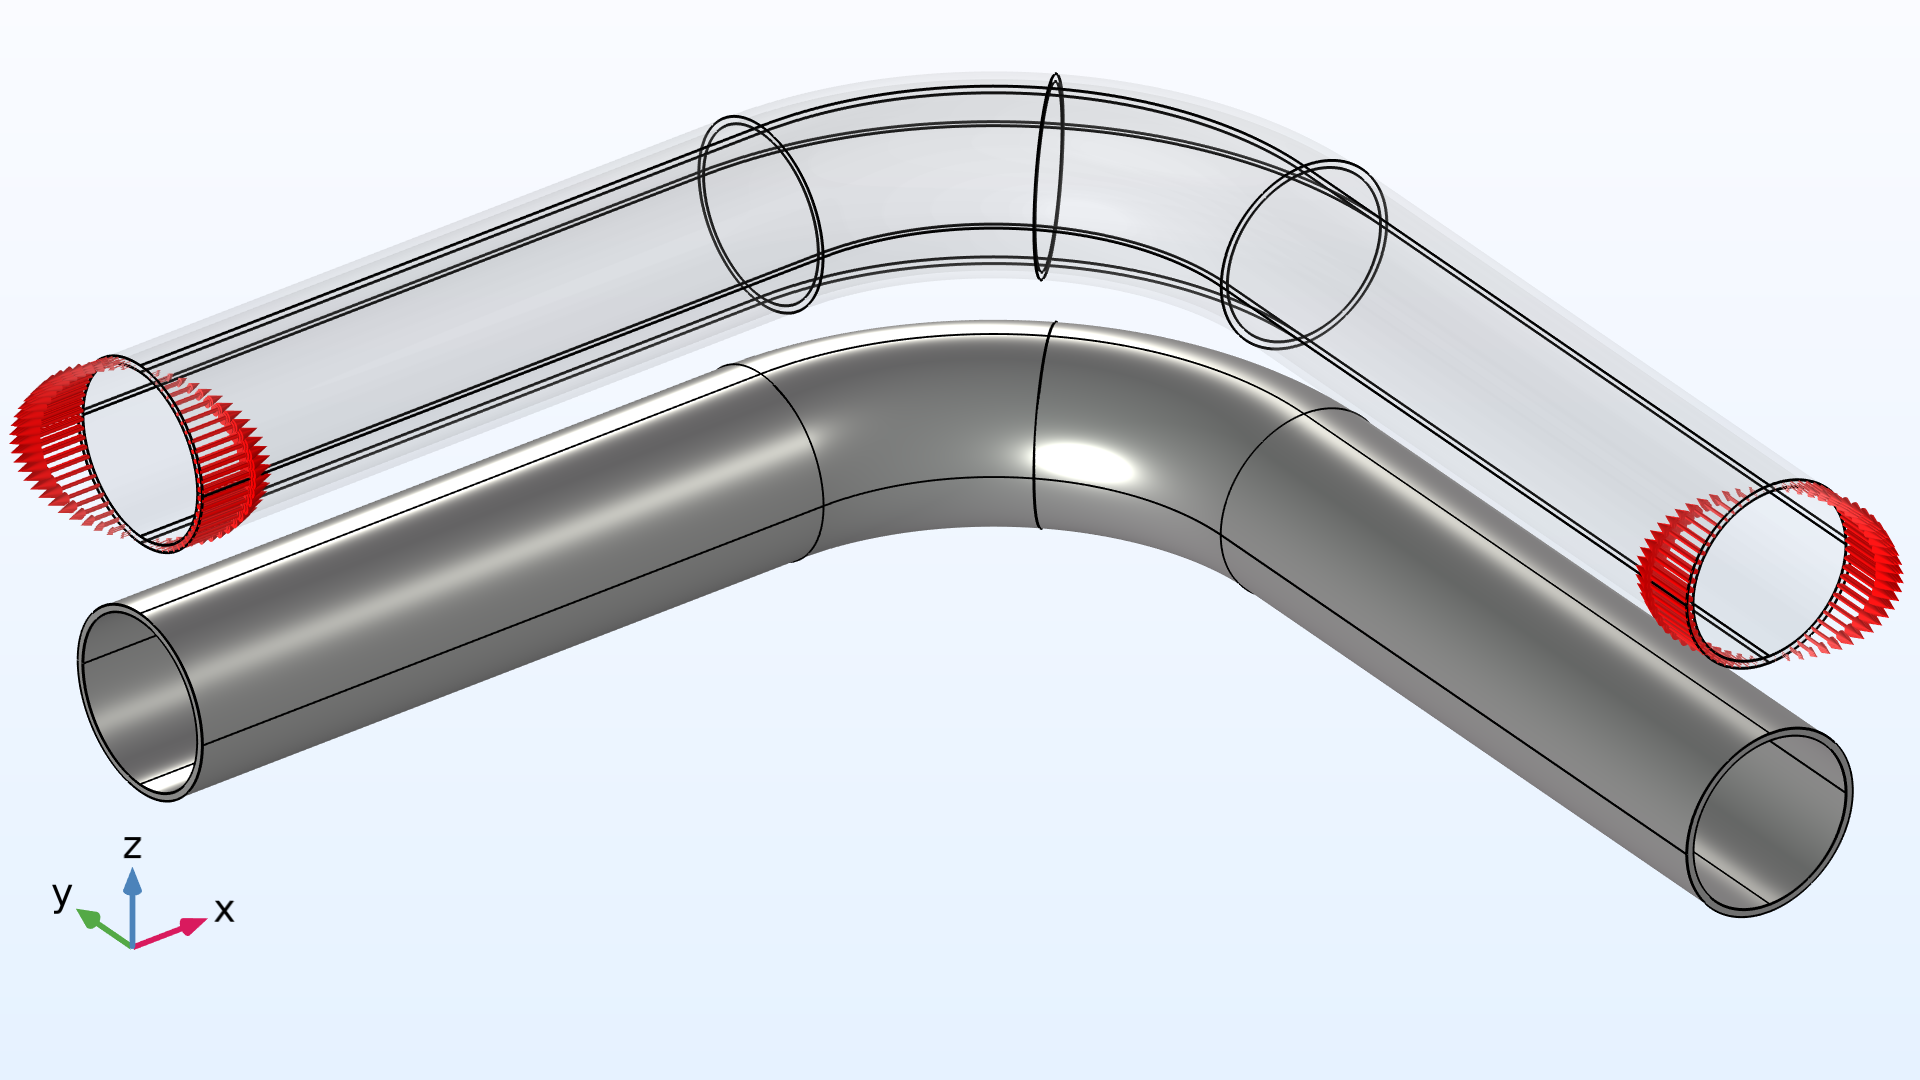 The geometry of a curve pipe (bottom) and its straight legs loaded in pure bending (top).